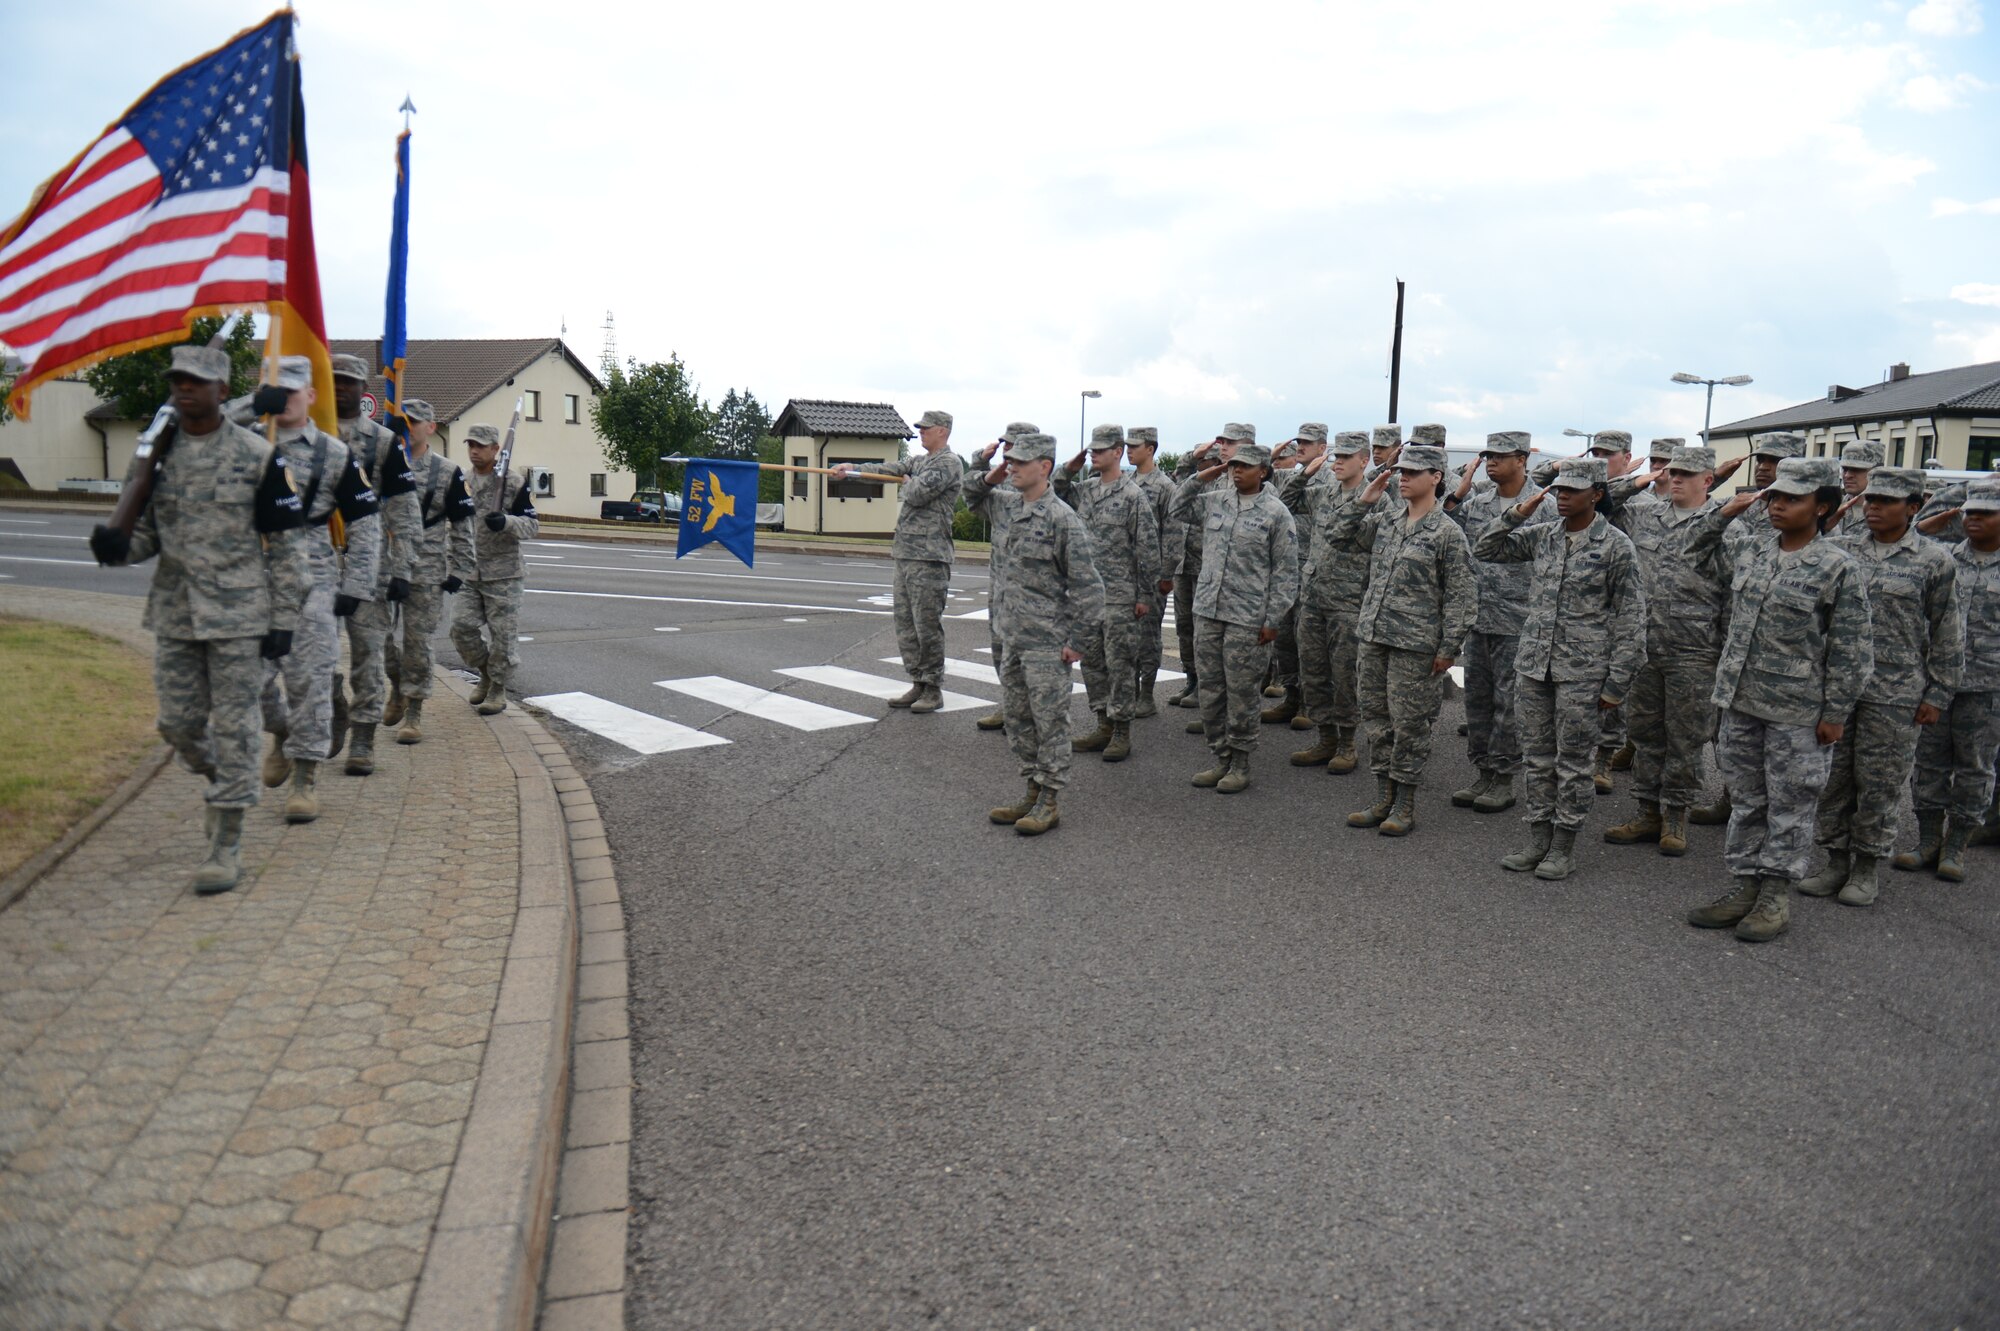 SPANGDAHLEM AIR BASE, Germany – The 52nd Force Support Squadron Honor Guard team march in front of a formation of Airmen during a 9/11 commemorative ceremony Sept. 11, 2013. A few hundred Airman and local area leaders attended the ceremony at the Spangdahlem Air Park Memorial. (U.S. Air Force photo by Airman 1st Class Gustavo Castillo/Released)